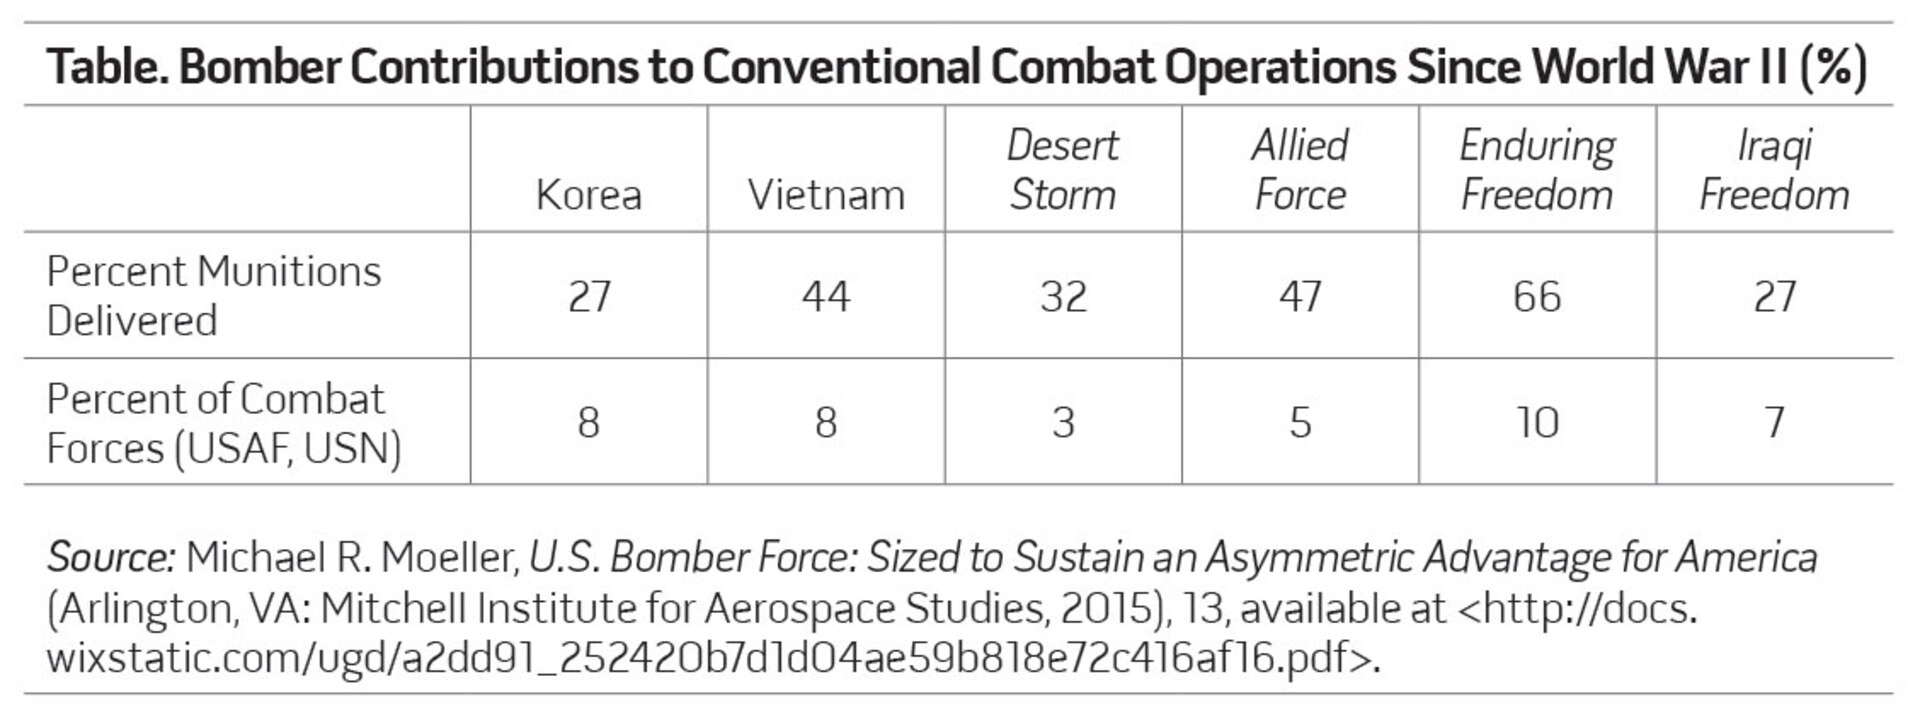 Table. Bomber Contributions to Conventional Combat Operations Since World War II (%)